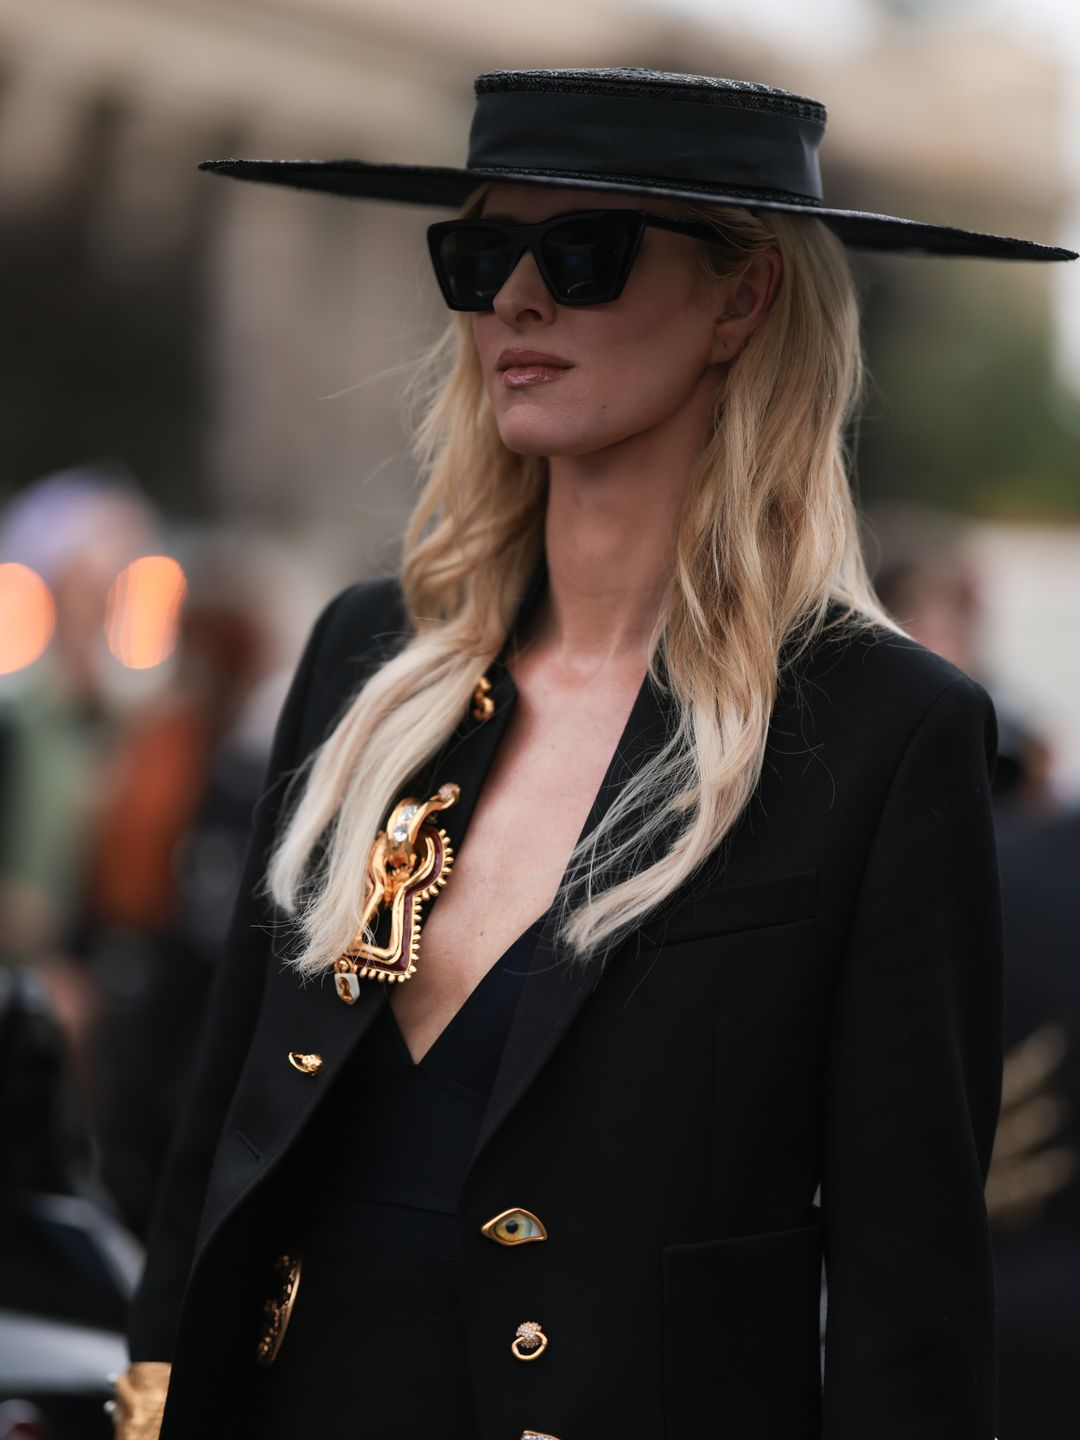 Nicky Hilton was seen outside Schiaparelli show wearing one of the label's signature brooches